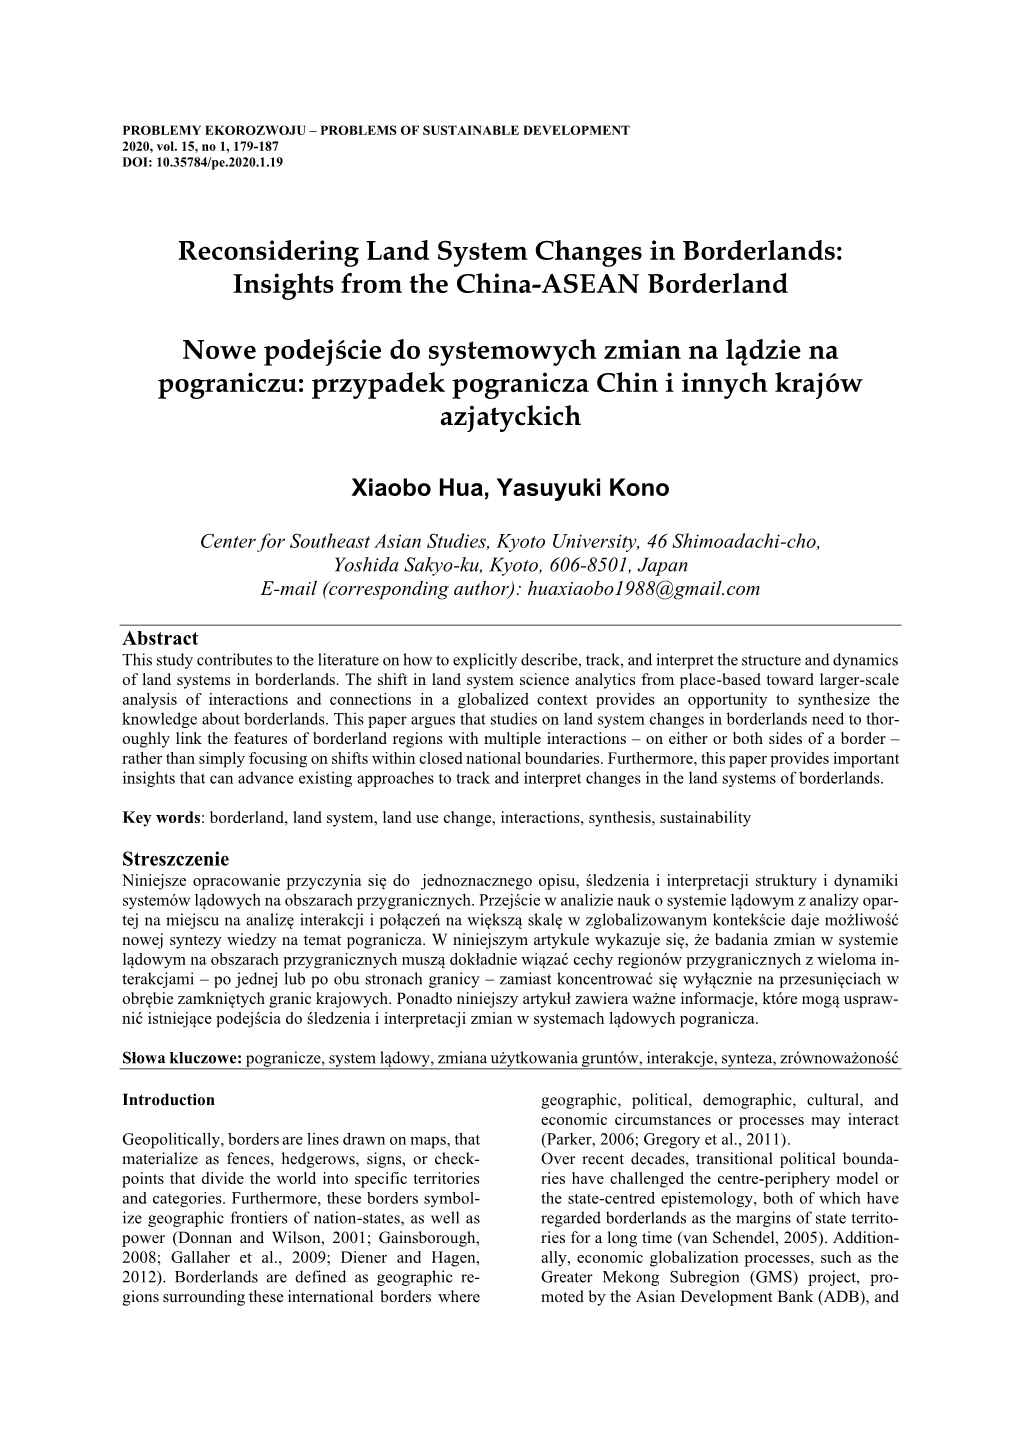 Reconsidering Land System Changes in Borderlands: Insights from the China-ASEAN Borderland